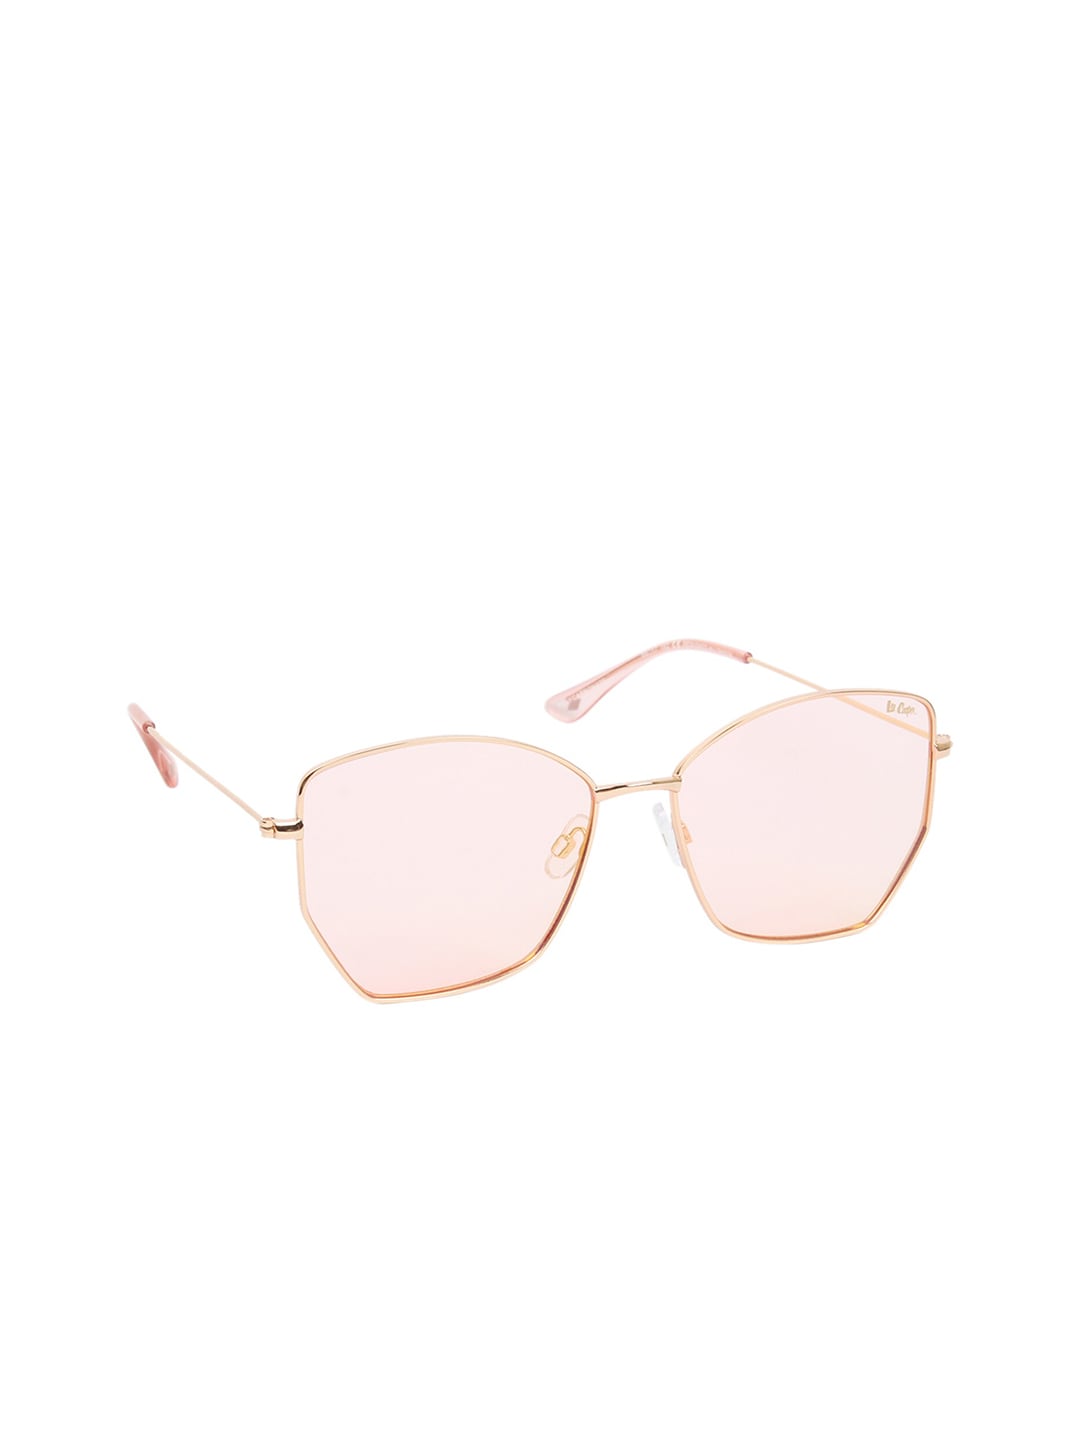 Lee Cooper Women Pink Lens & Gold-Toned Butterfly Sunglasses with UV Protected Lens LC9177 Price in India